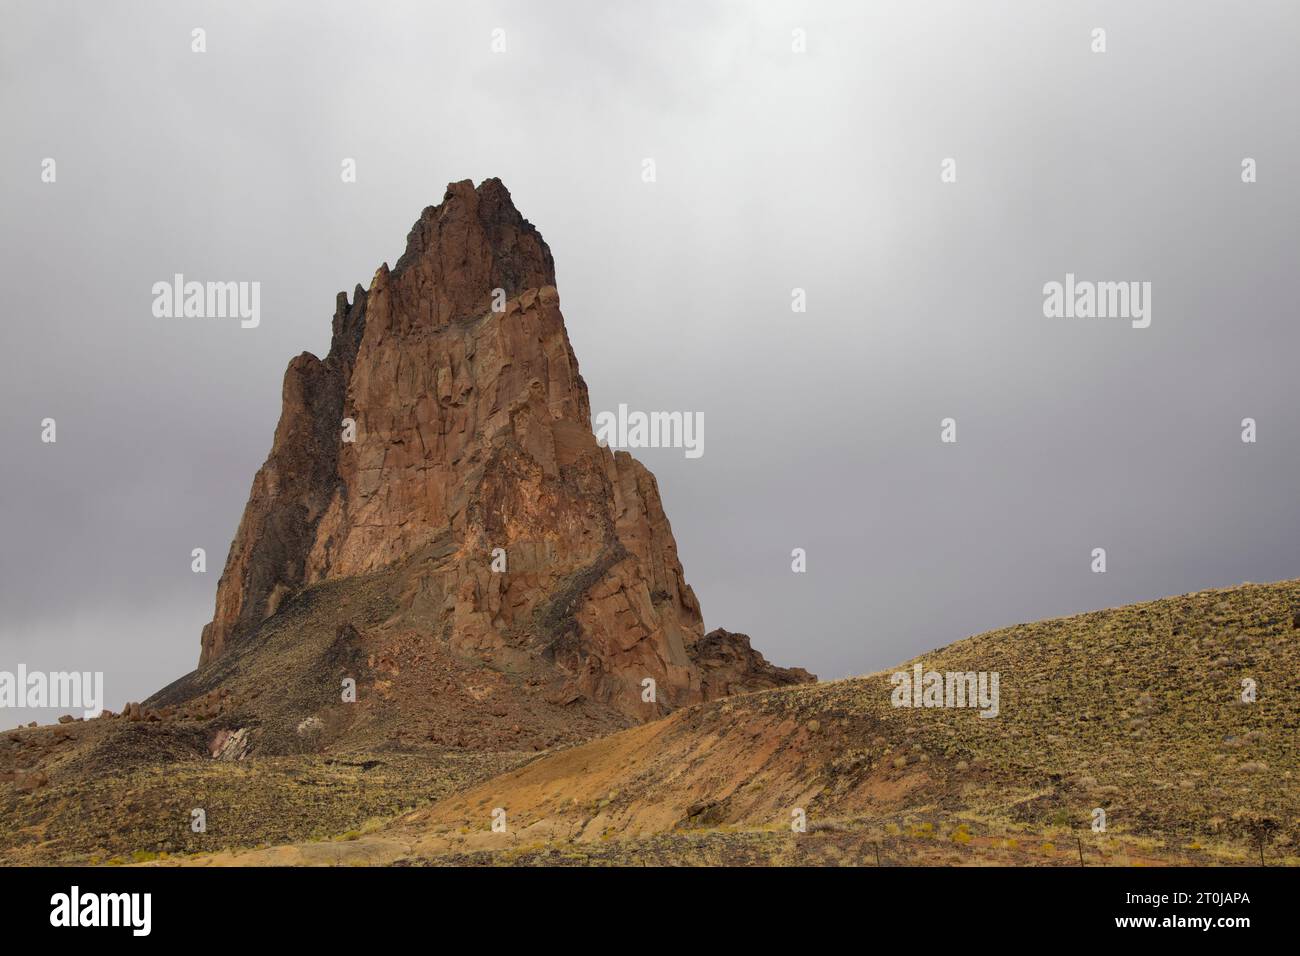 Agathla Peak, an eroded volcanic plug considered sacred by the Navajo, near Monument Valley, AZ Stock Photo